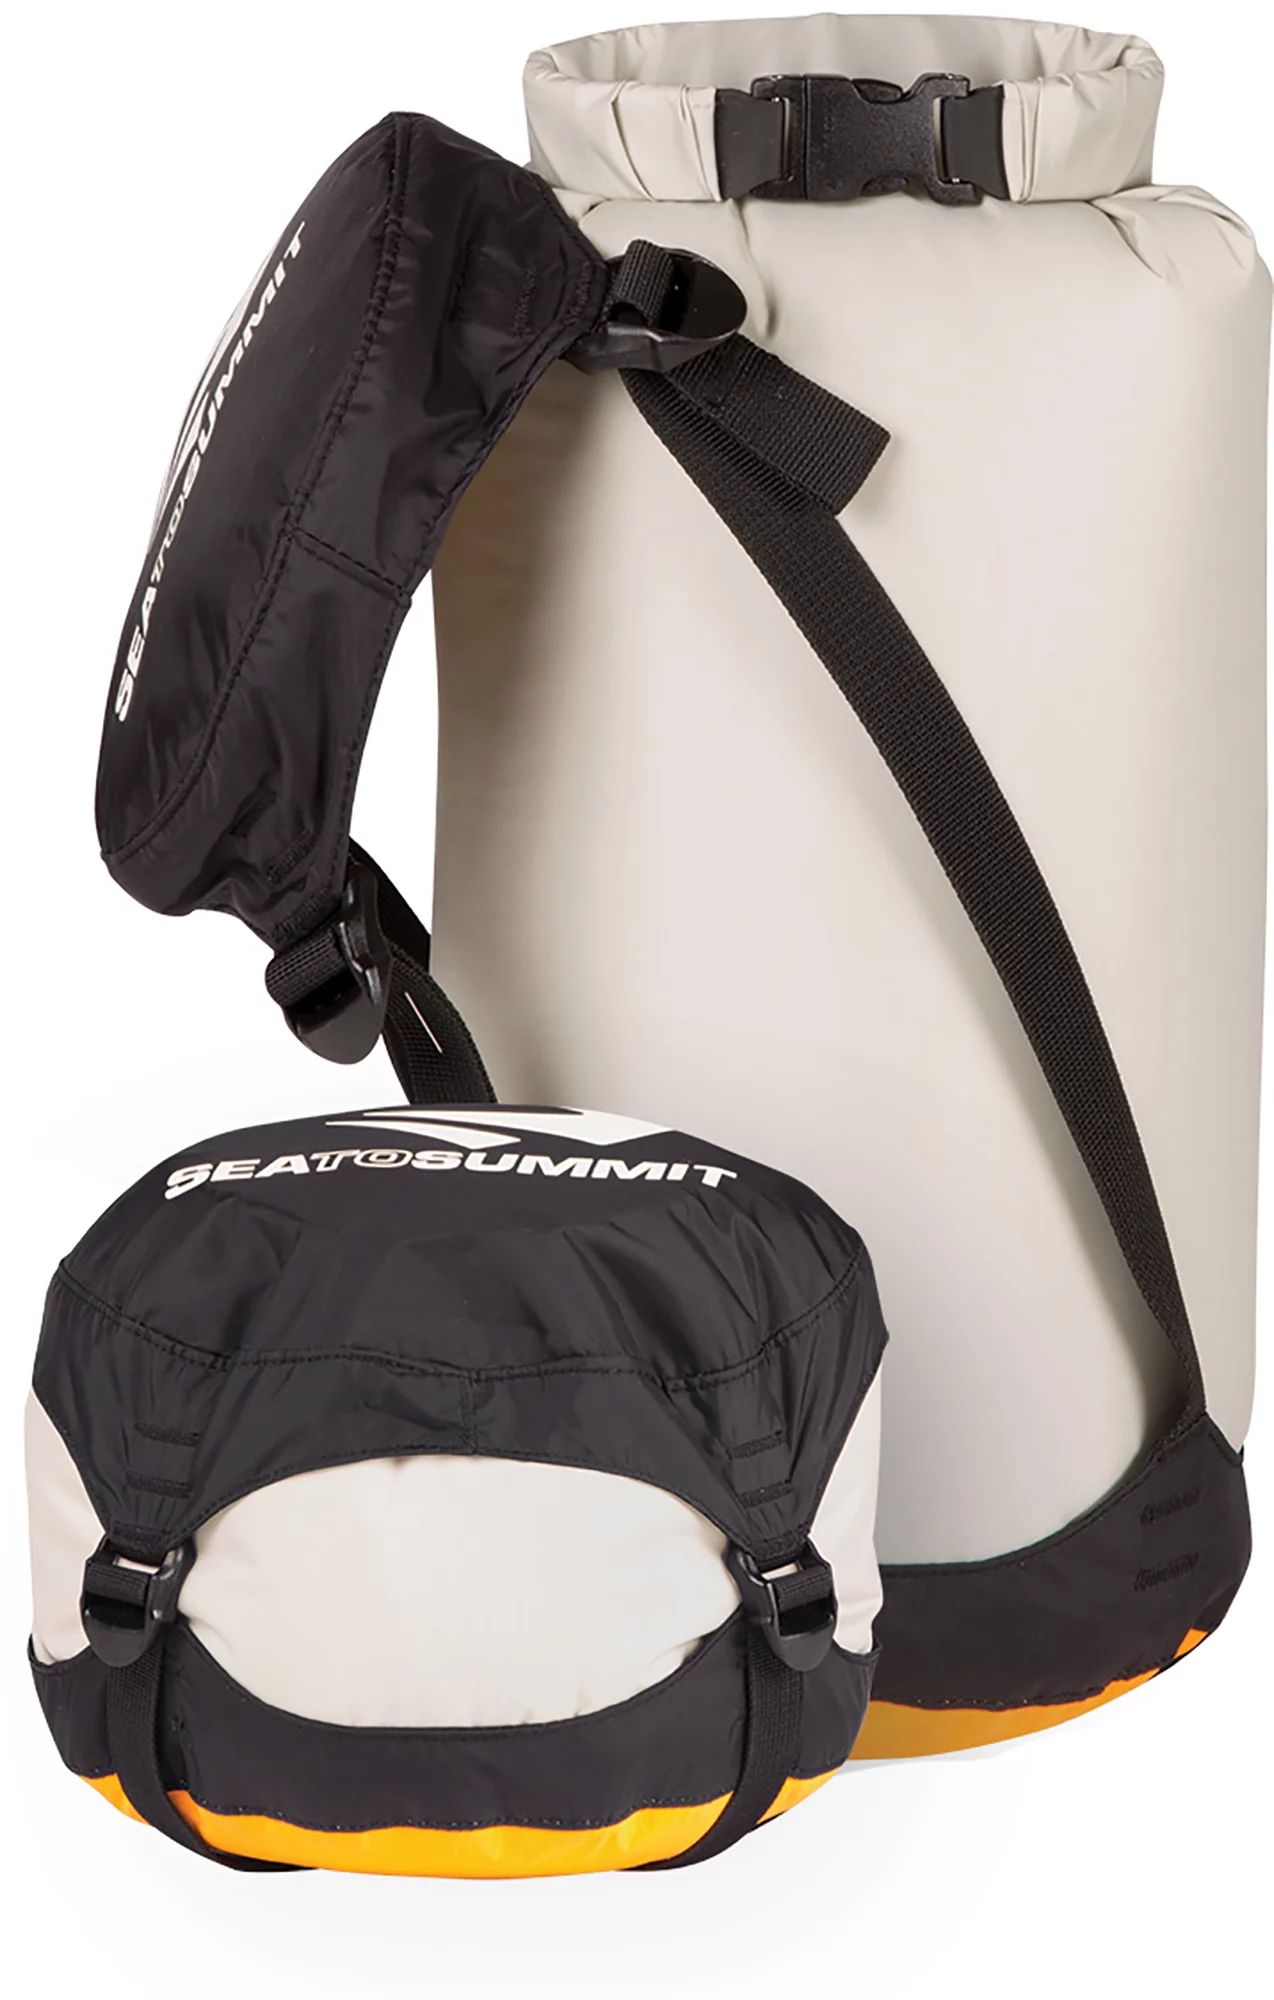 Sea to Summit eVent Dry Sack, 14L | Public Lands